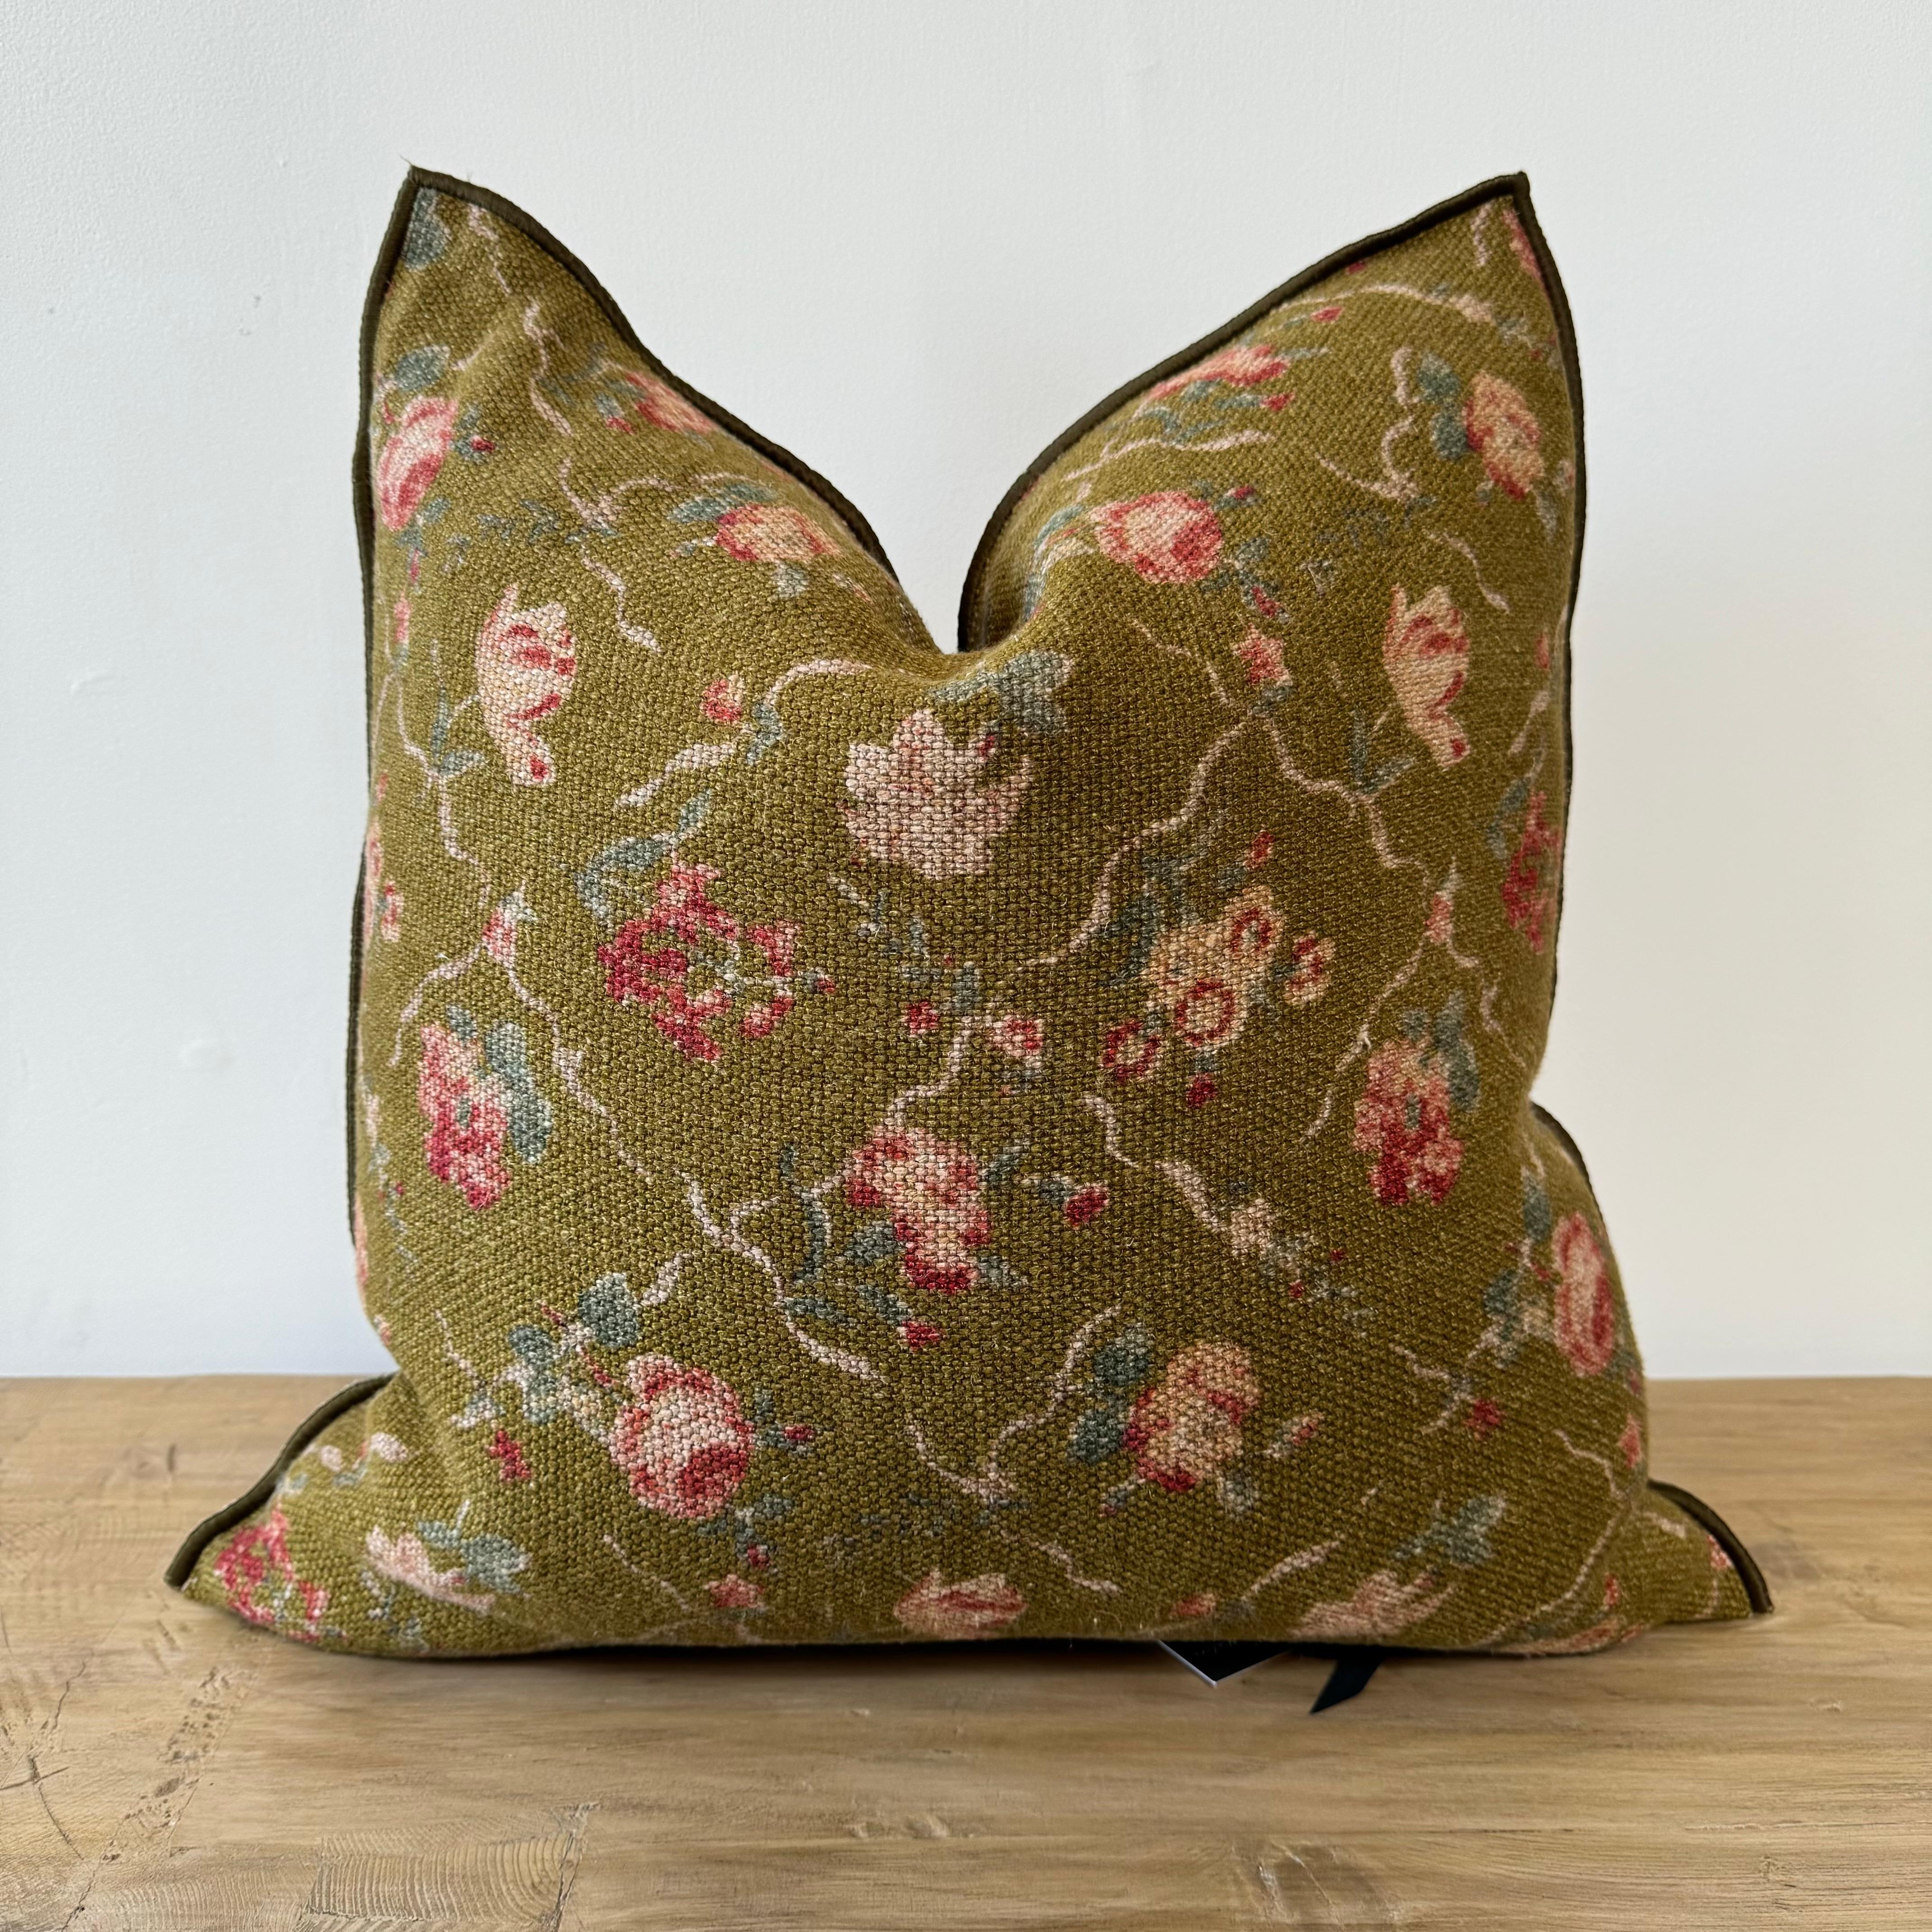 Made in France
100% pure linen pillow printed on a bronze / dark brown linen with floral print.  The edges have a binded edge, and metal zipper closure
Wabi Sabi Estampado
Collection: Jardin Secret Bronze
Size: 20